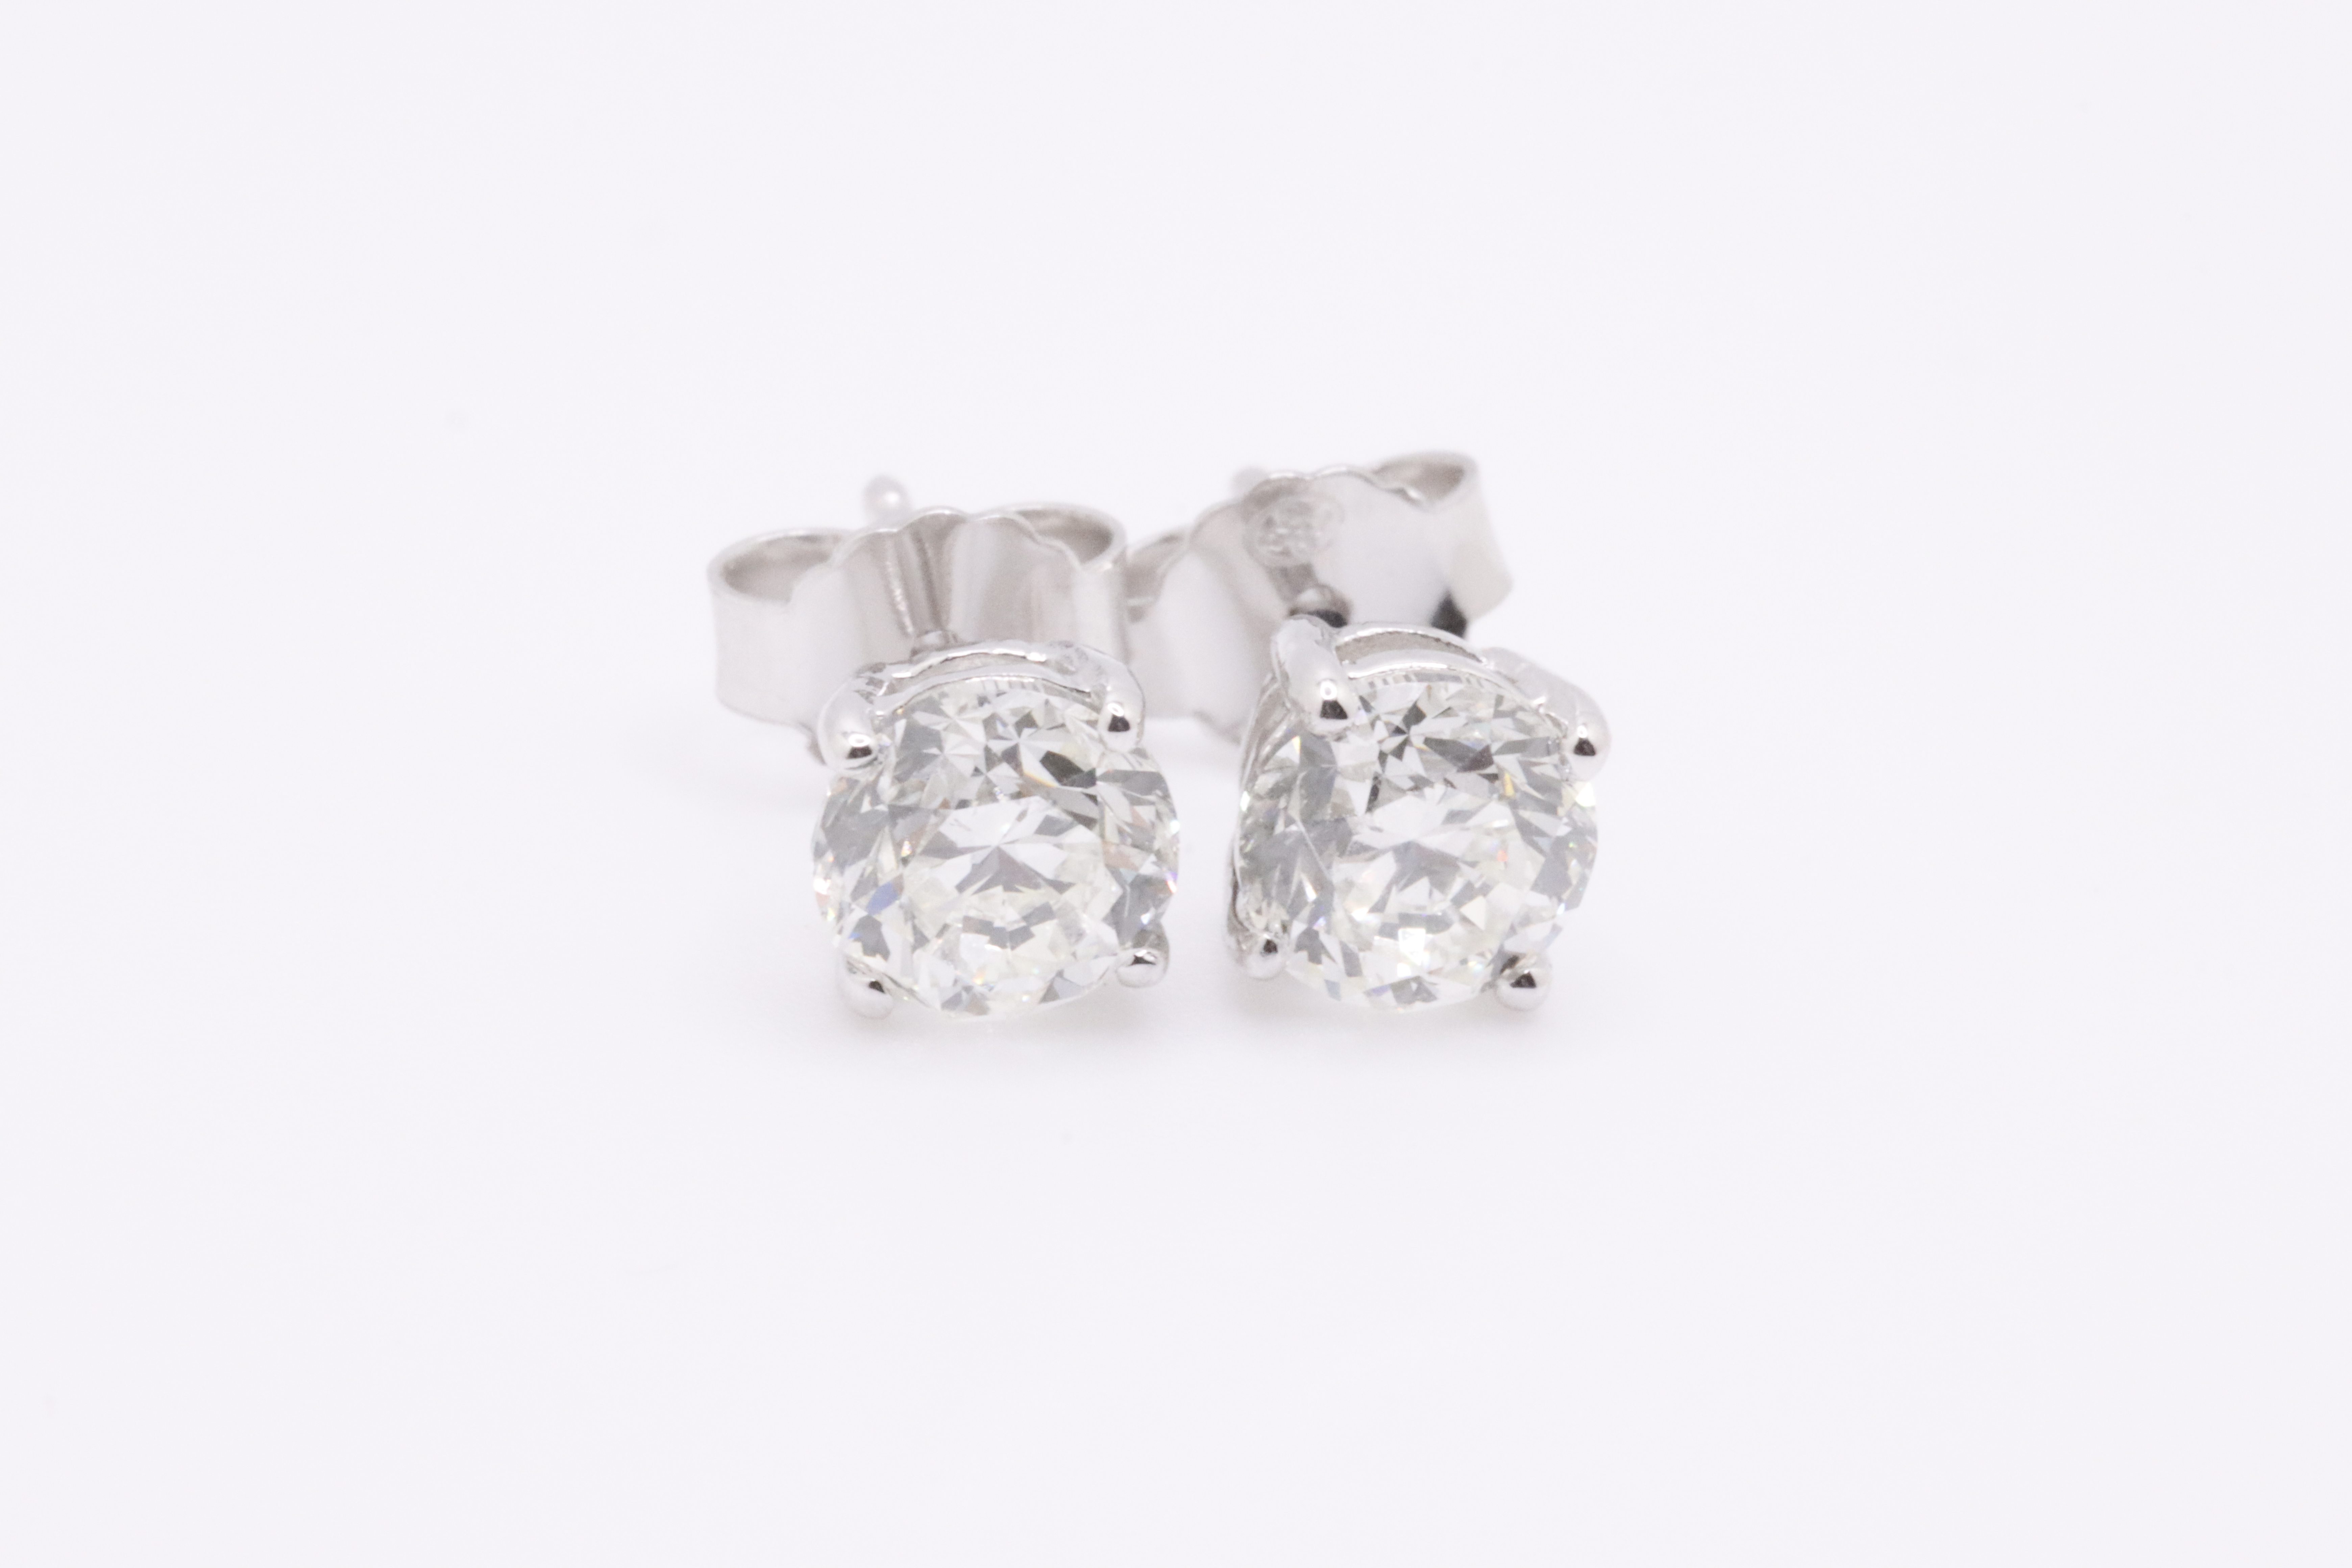 ** ON SALE ** Round Brilliant Cut 1.00 Carat Diamond 18kt White Gold Earrings- F Colour VS Clarity - Image 2 of 5